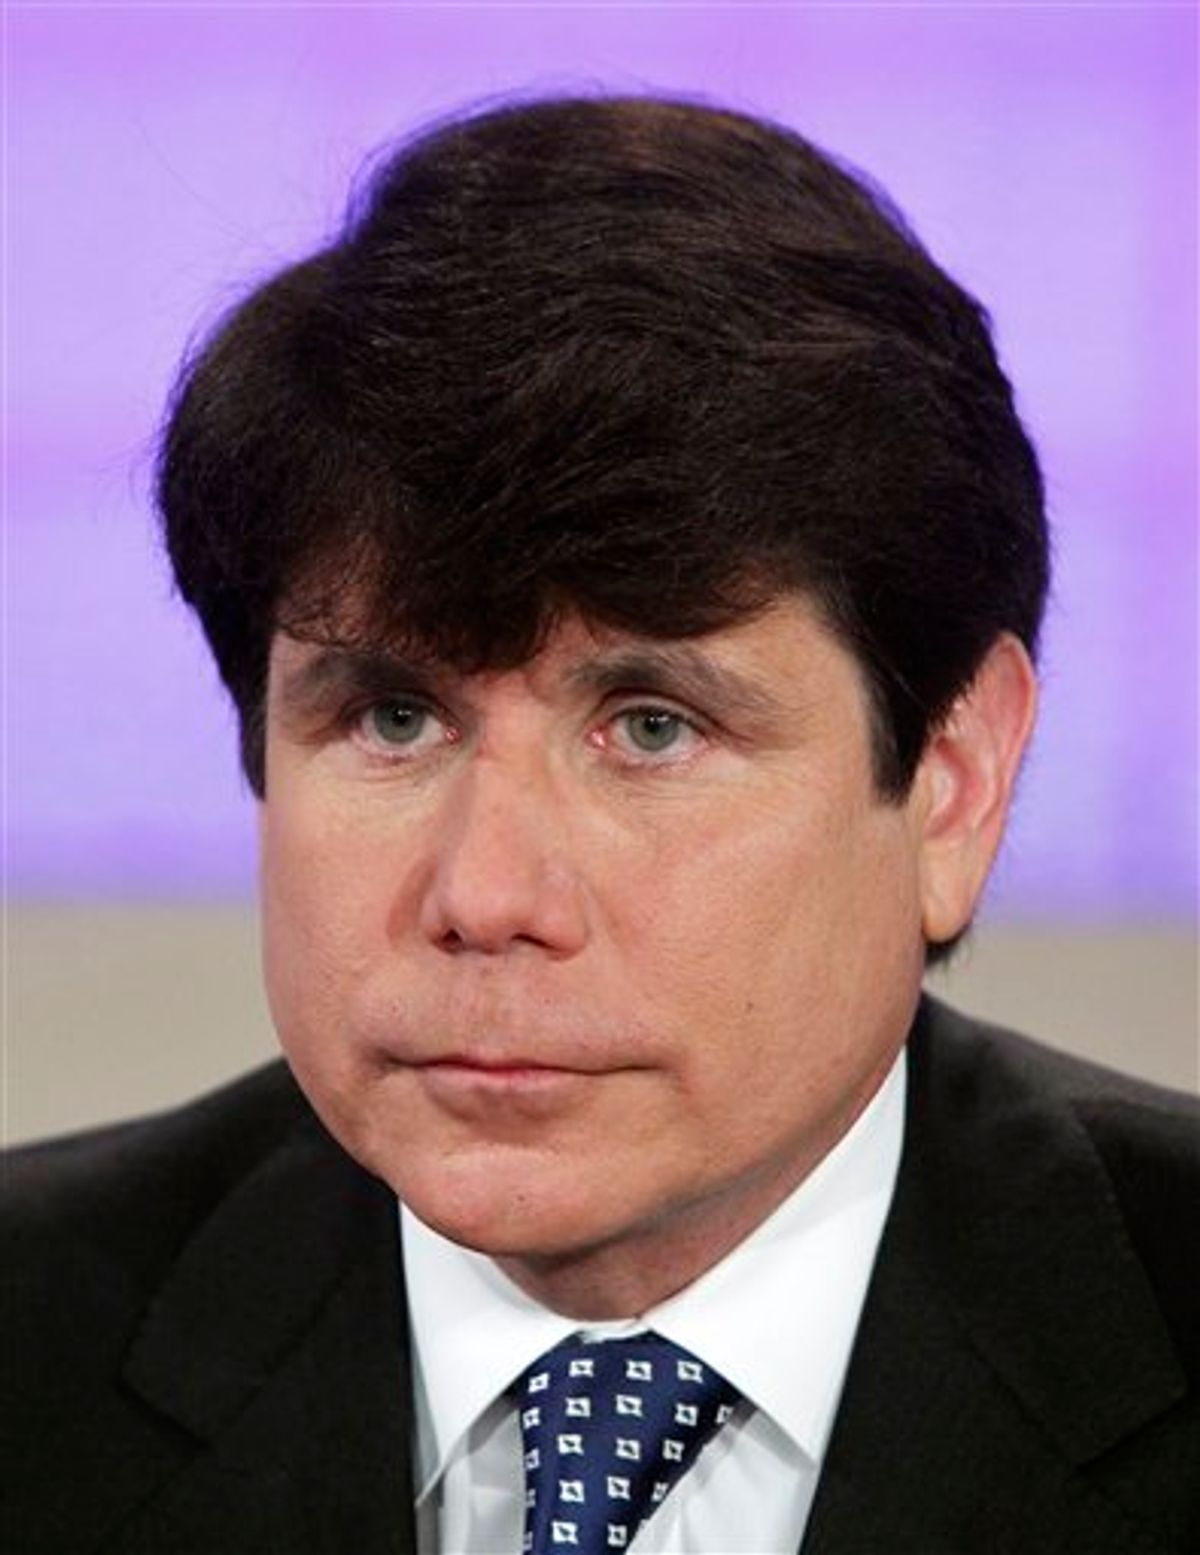 FILE - This file photo provided by NBC shows former Illinois governor Rod Blagojevich on NBC's "Today" show, in New York, on Friday, Aug. 20, 2010. Blagojevich has asked a judge to cancel his spring retrial and immediately sentence him instead on the sole conviction from his first trial. The request comes in a motion filed in U.S. District Court in Chicago early Wednesday March 9, 2011. (AP Photo/NBC, Peter Kramer, File) NO SALES (AP)